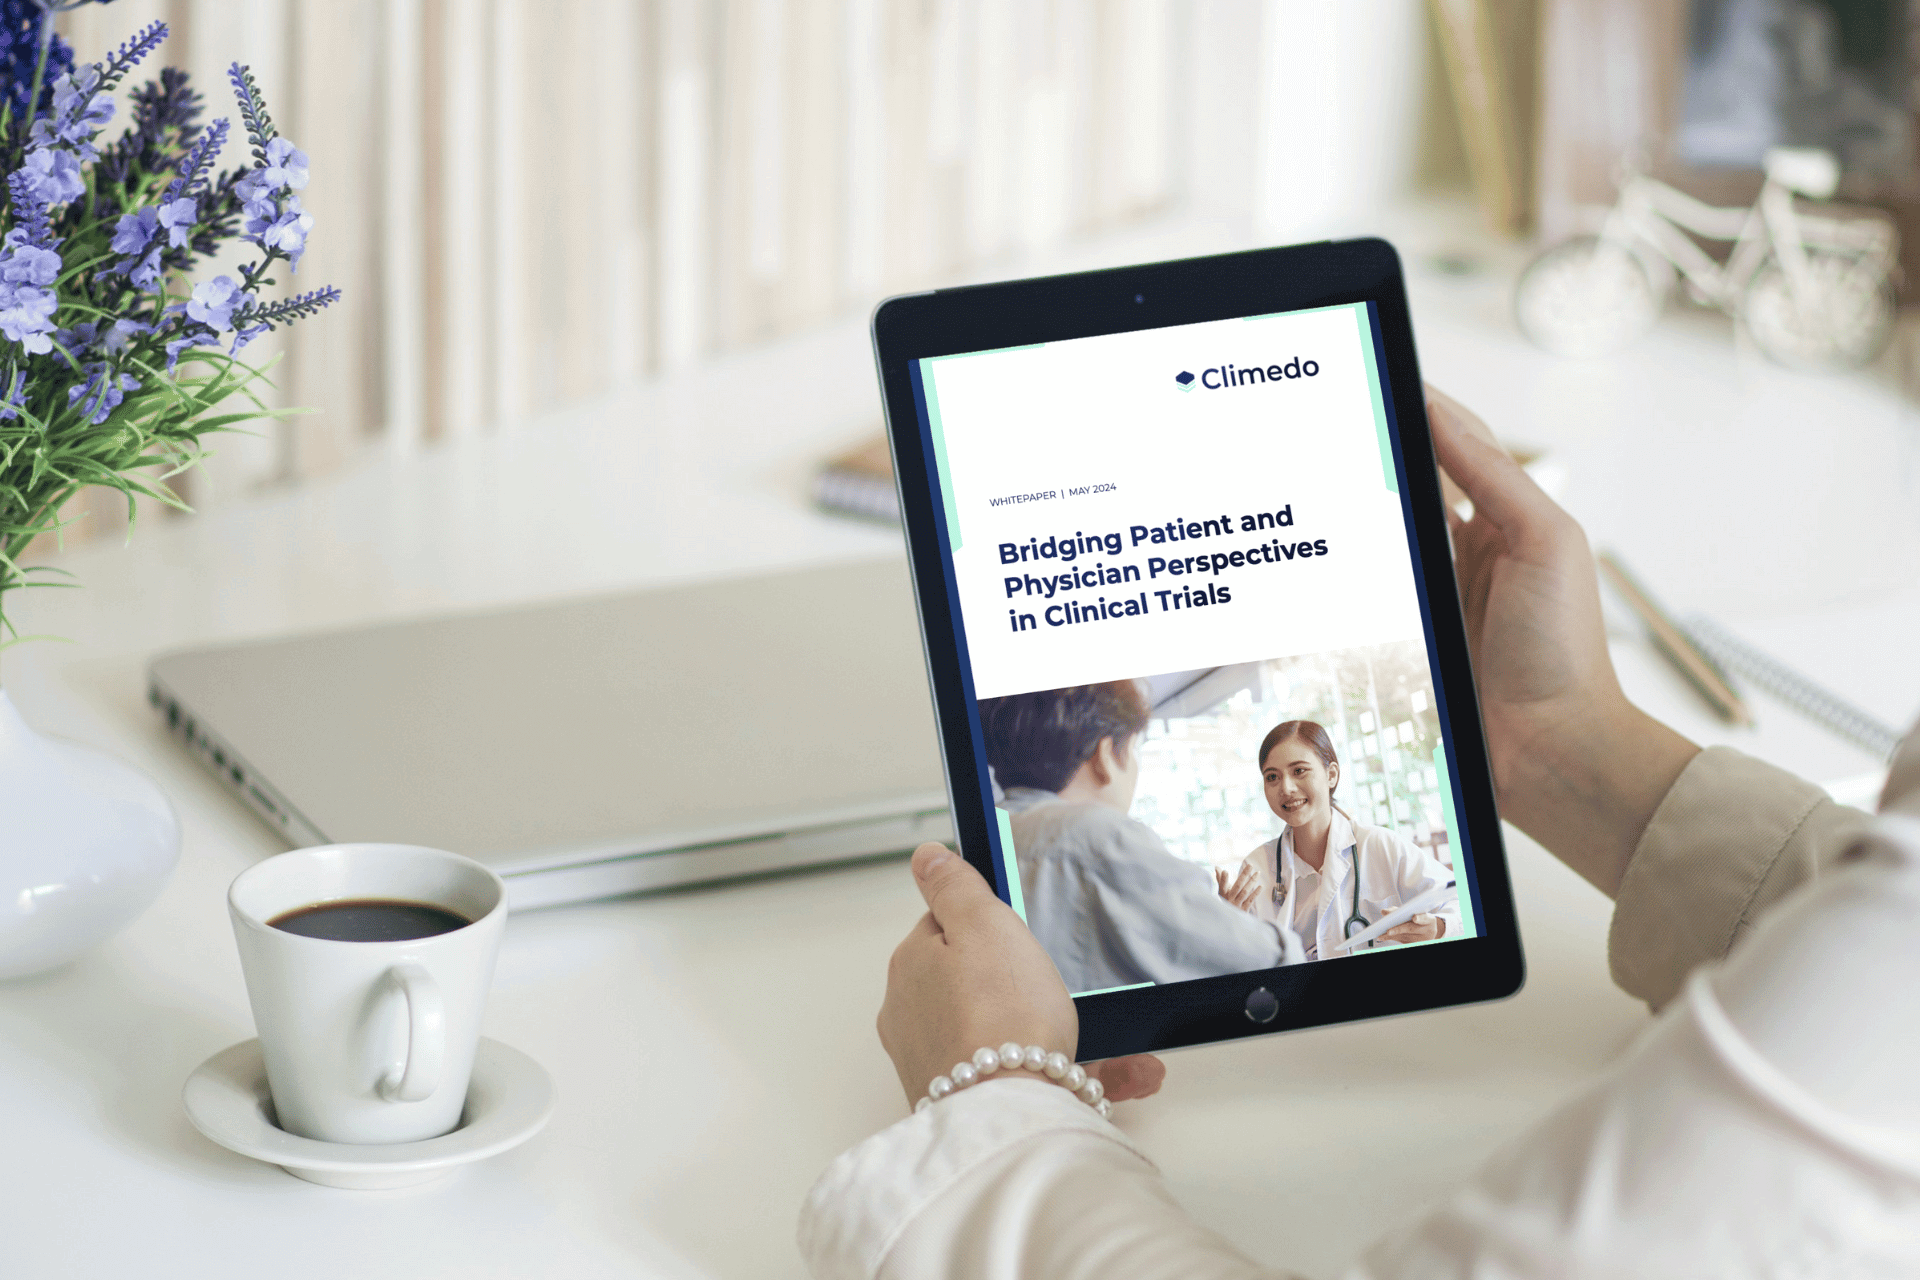 New Whitepaper: Bridging Patient and Physician Perspectives in Clinical Trials